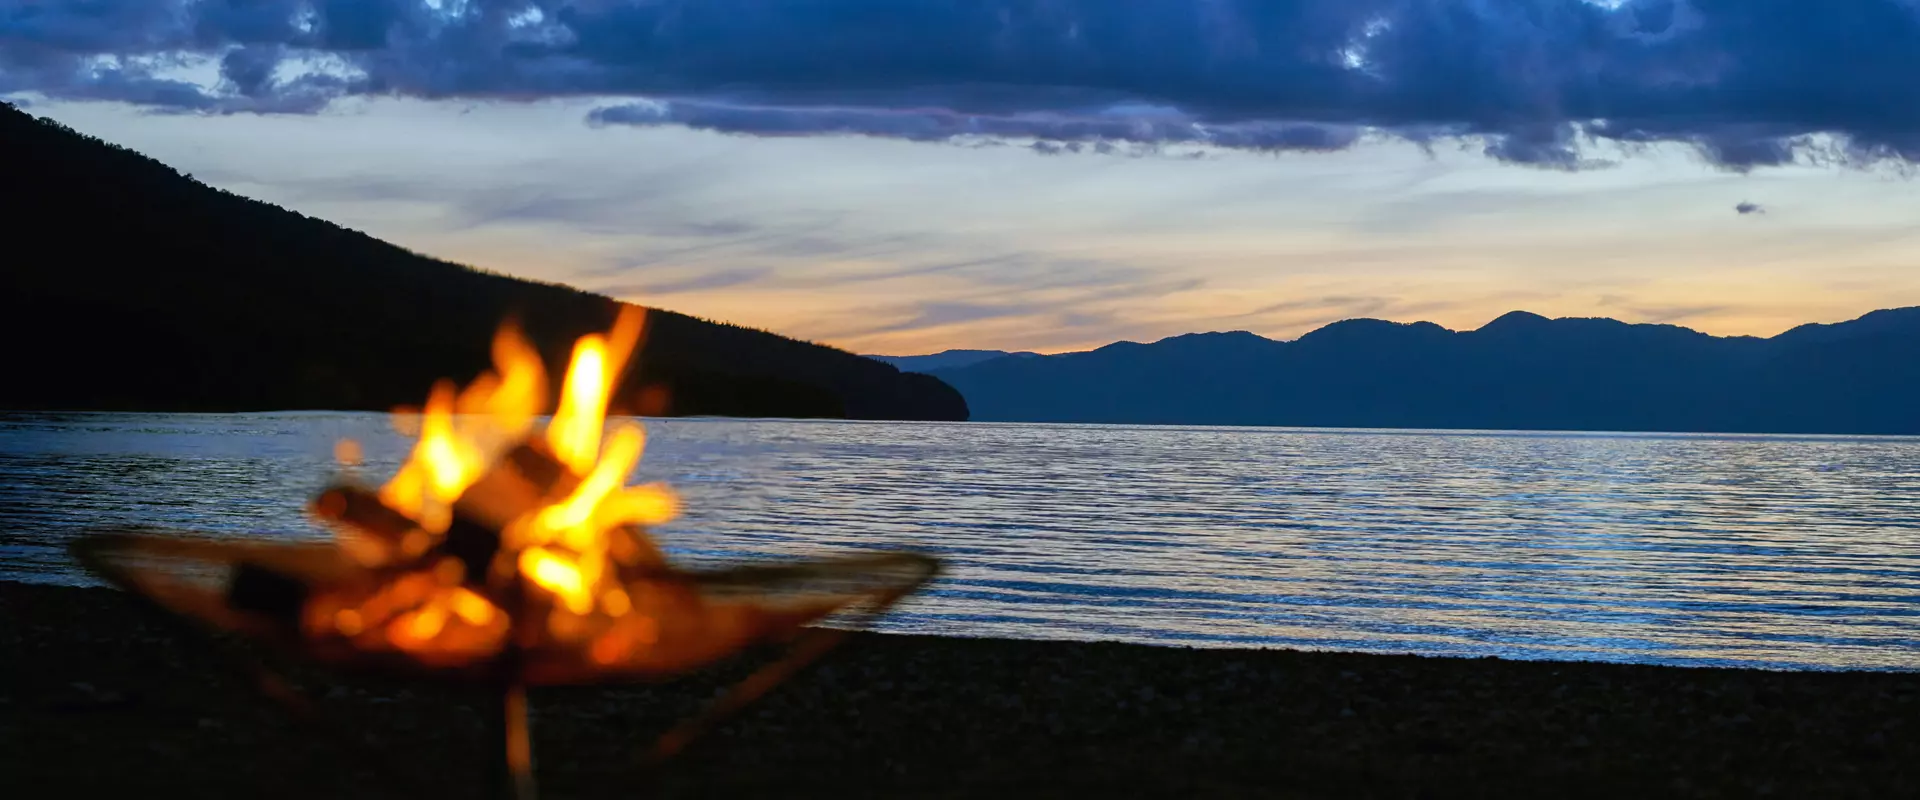 Bonfire over the water at dusk